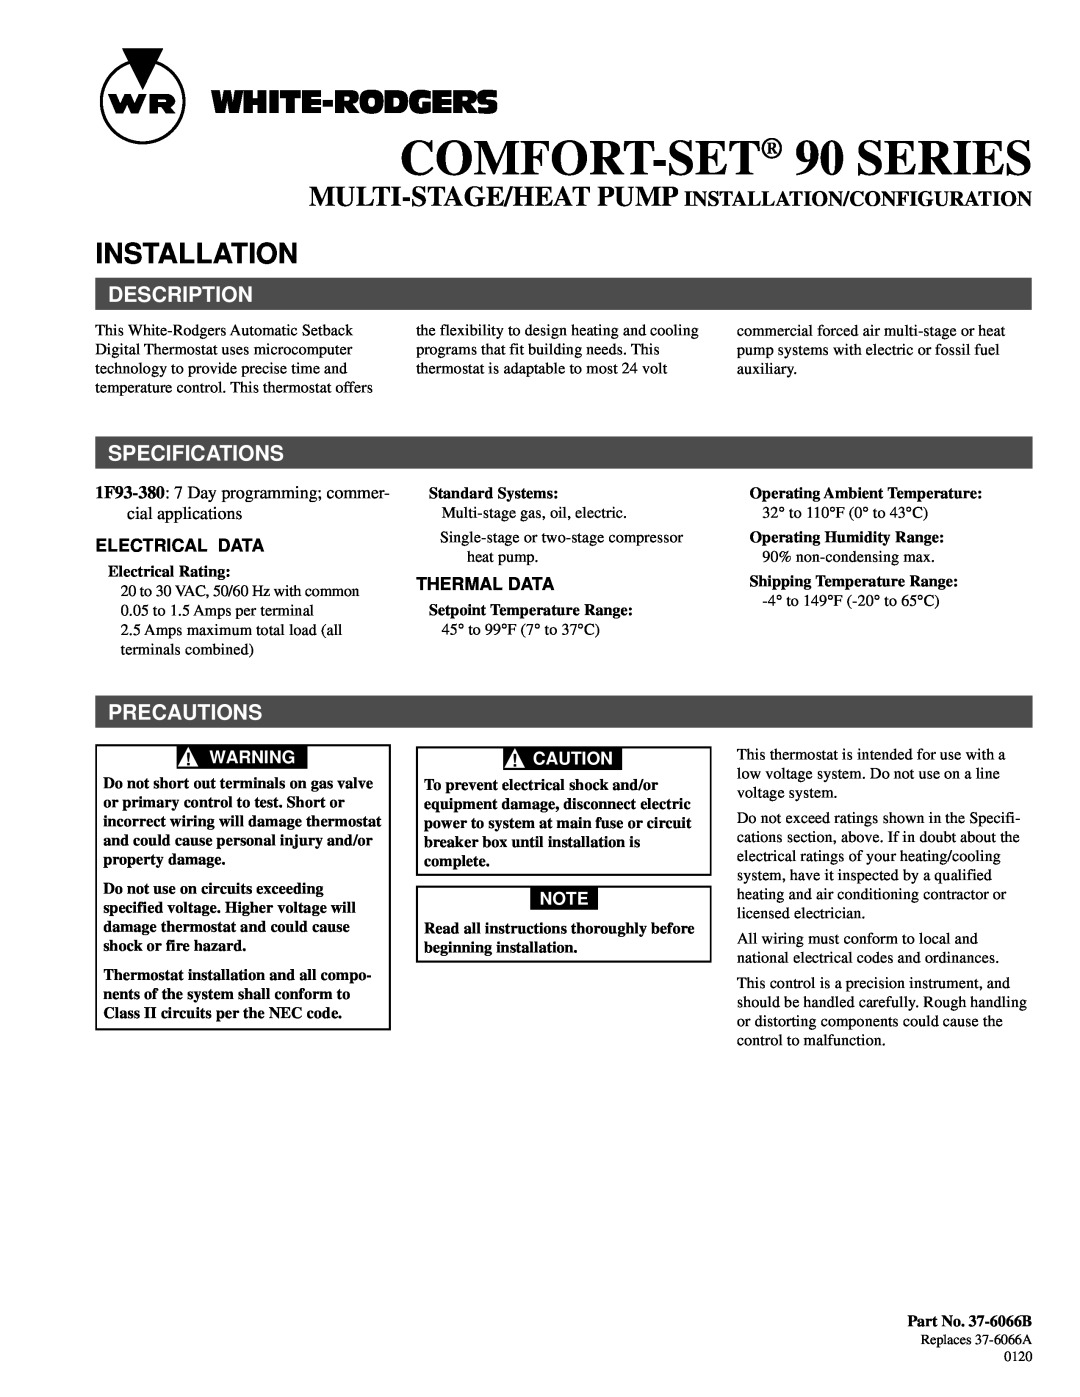 White Rodgers 90 SERIES specifications Installation, Description, Specifications, Precautions, Electrical Data 